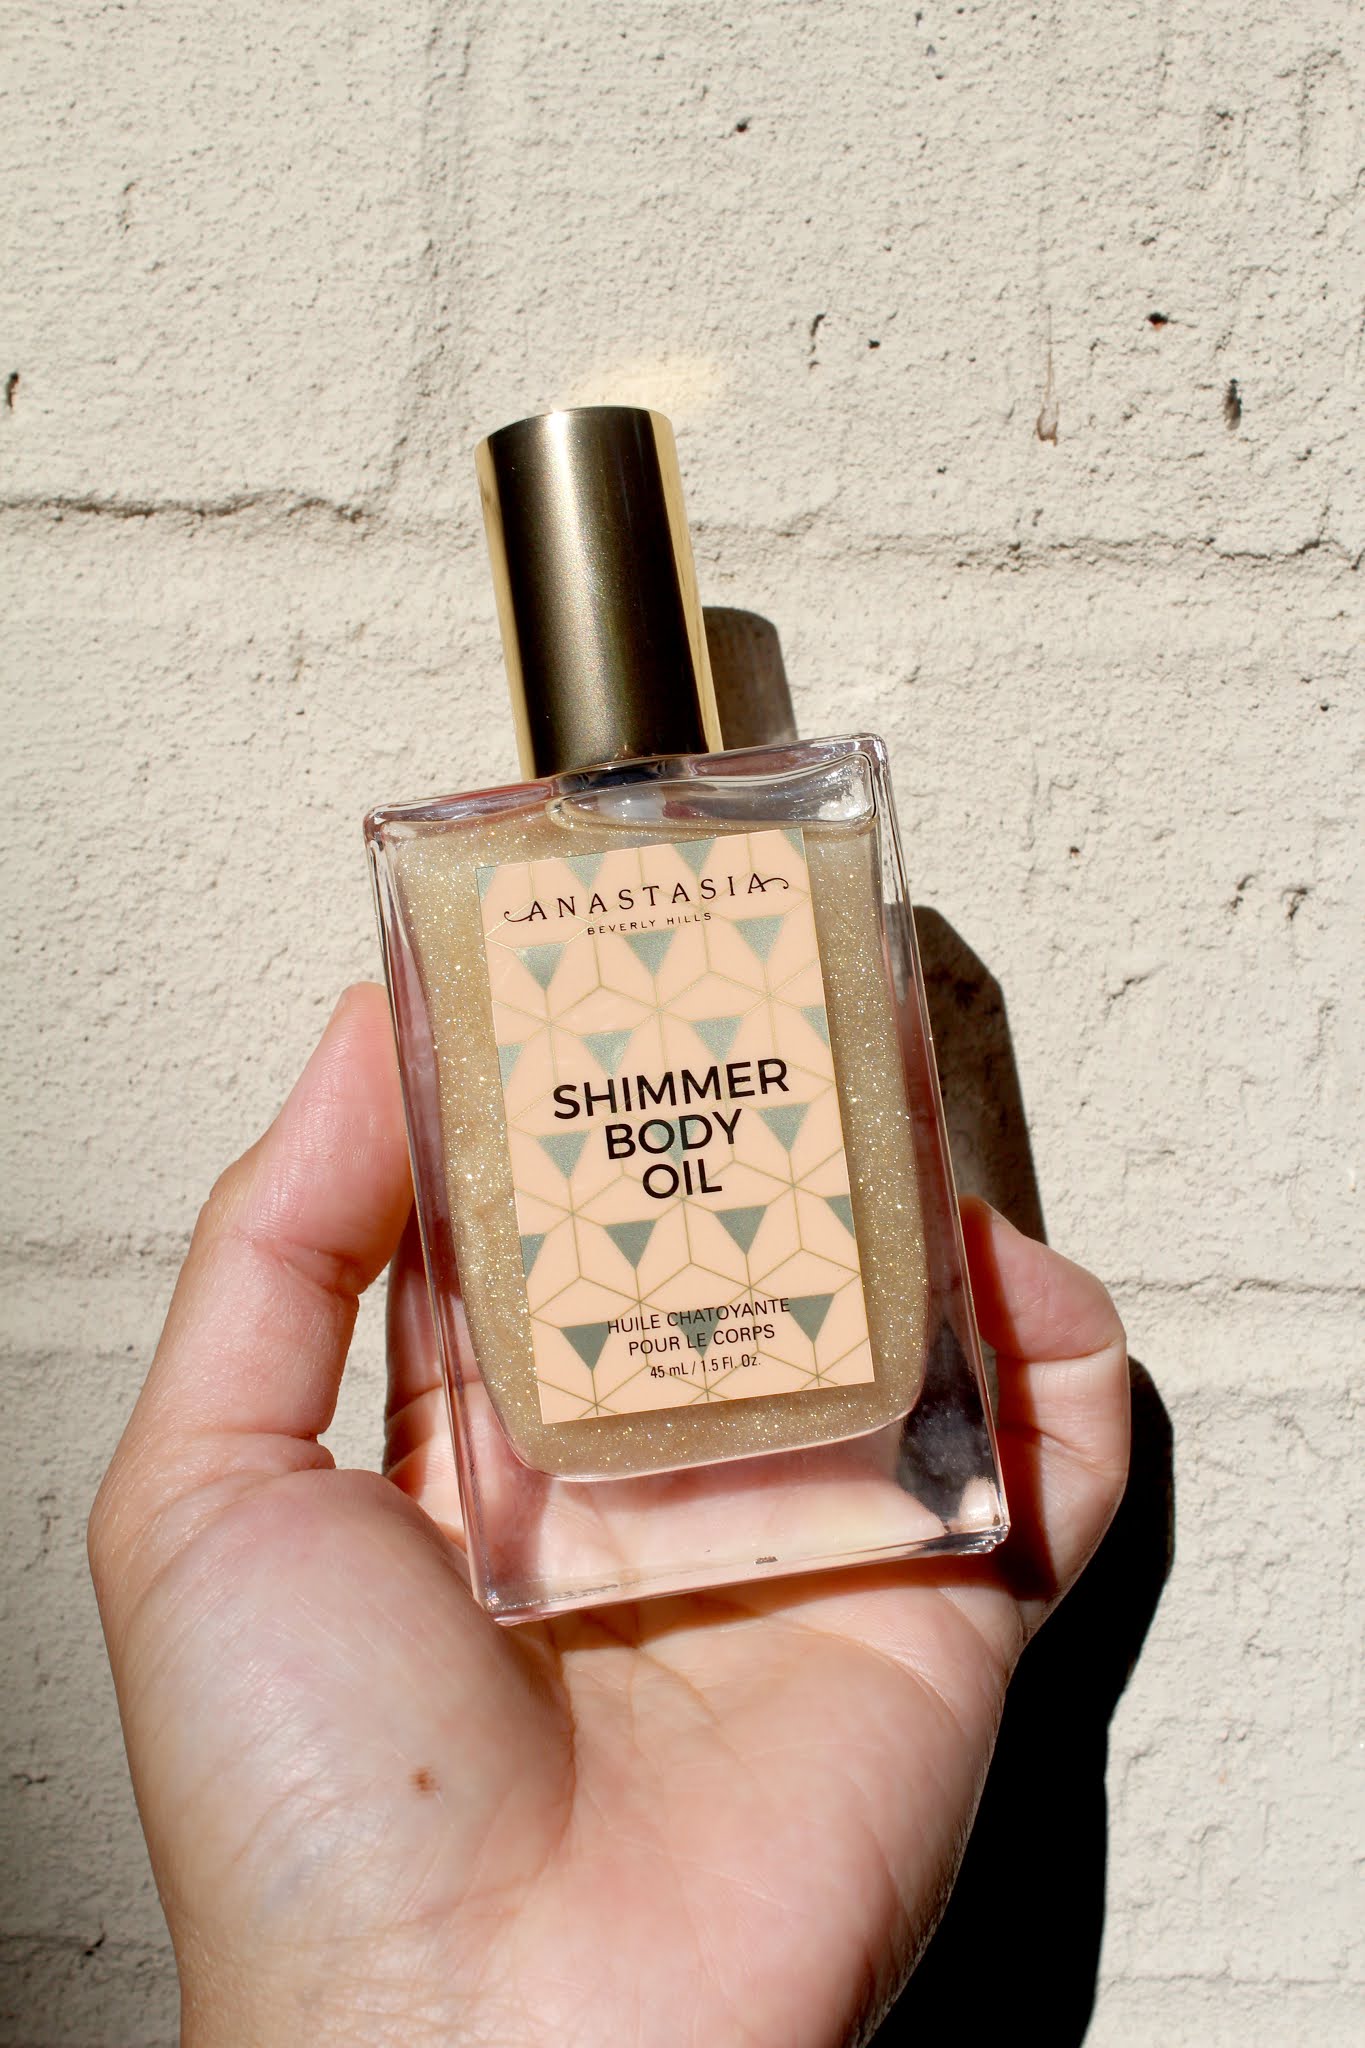 Body Oil shimmer review! My top pick was Anastasia. I liked the spray